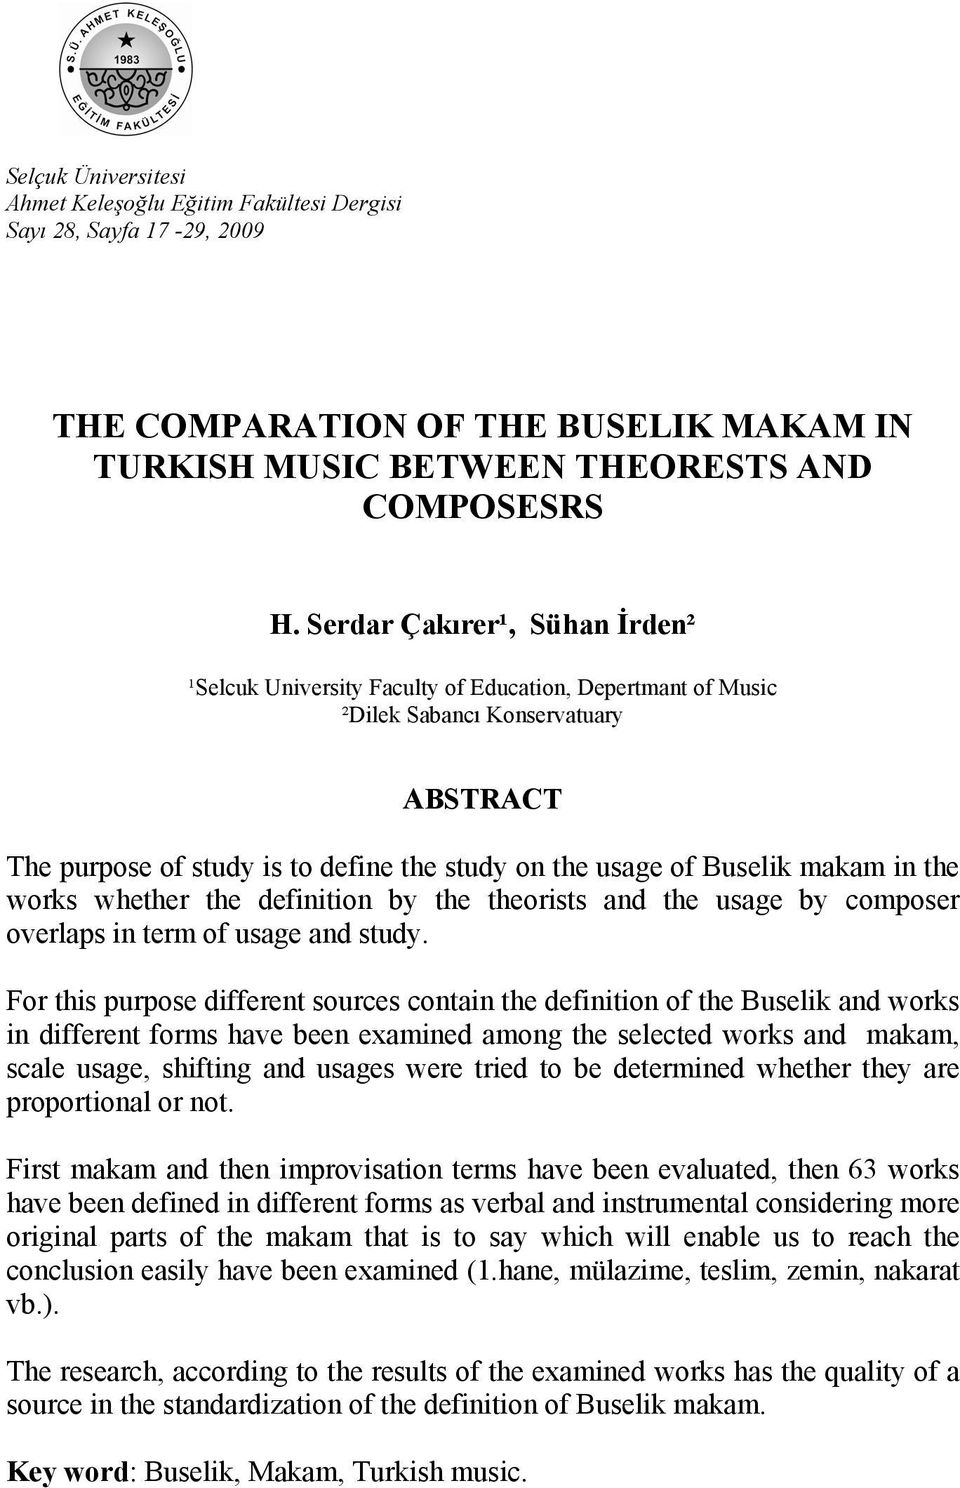 makam in the works whether the definition by the theorists and the usage by composer overlaps in term of usage and study.